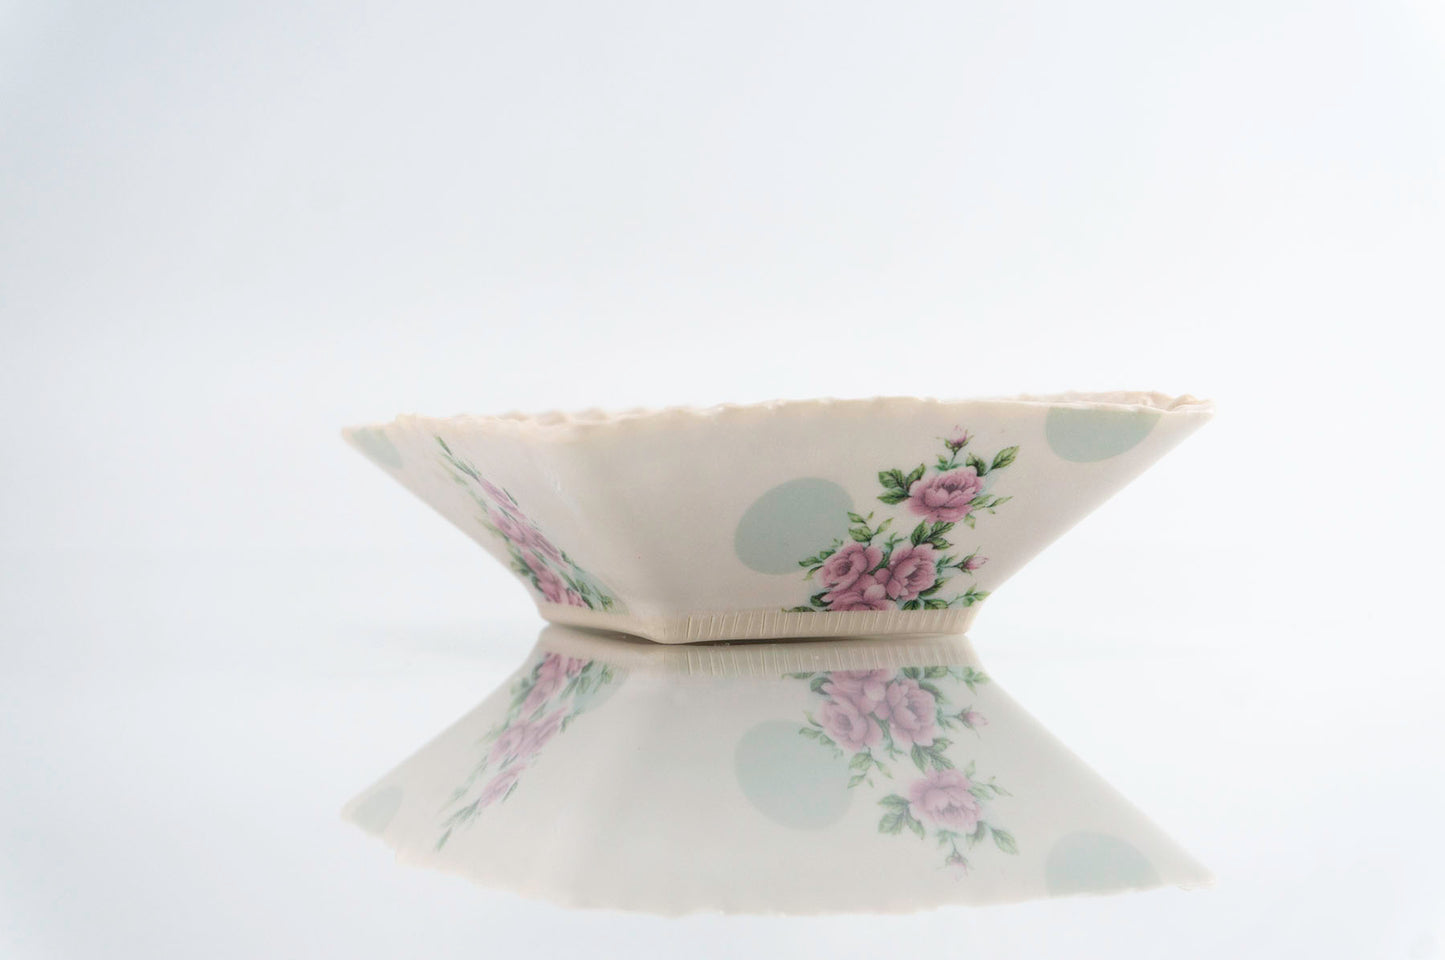 Flower and Green Dot Square Dish (d-118)